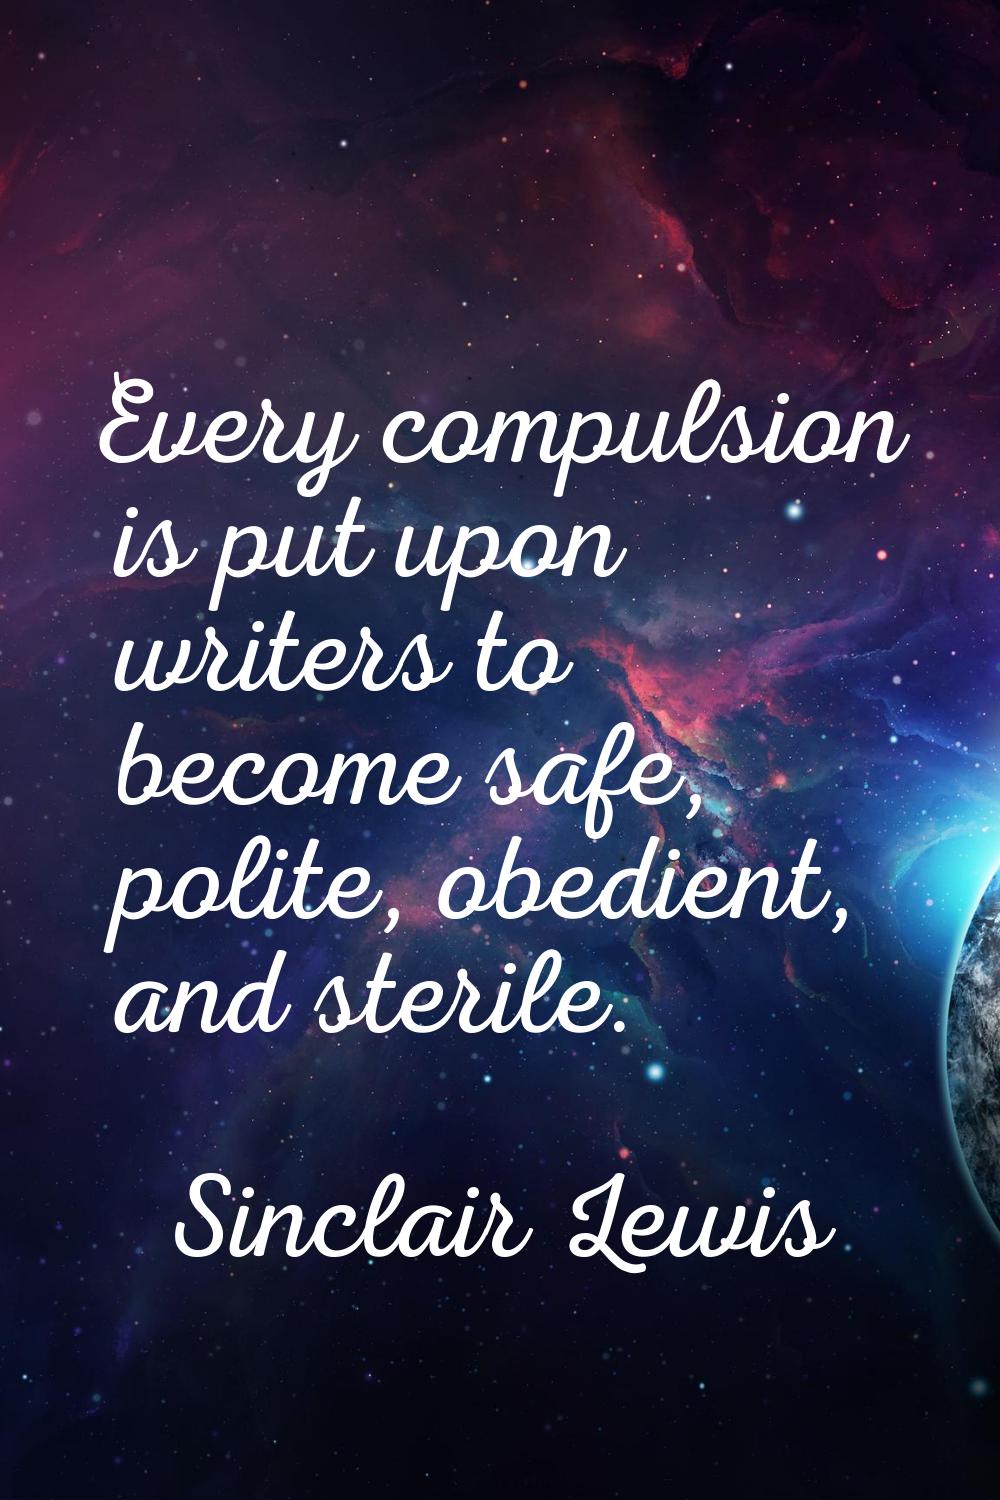 Every compulsion is put upon writers to become safe, polite, obedient, and sterile.